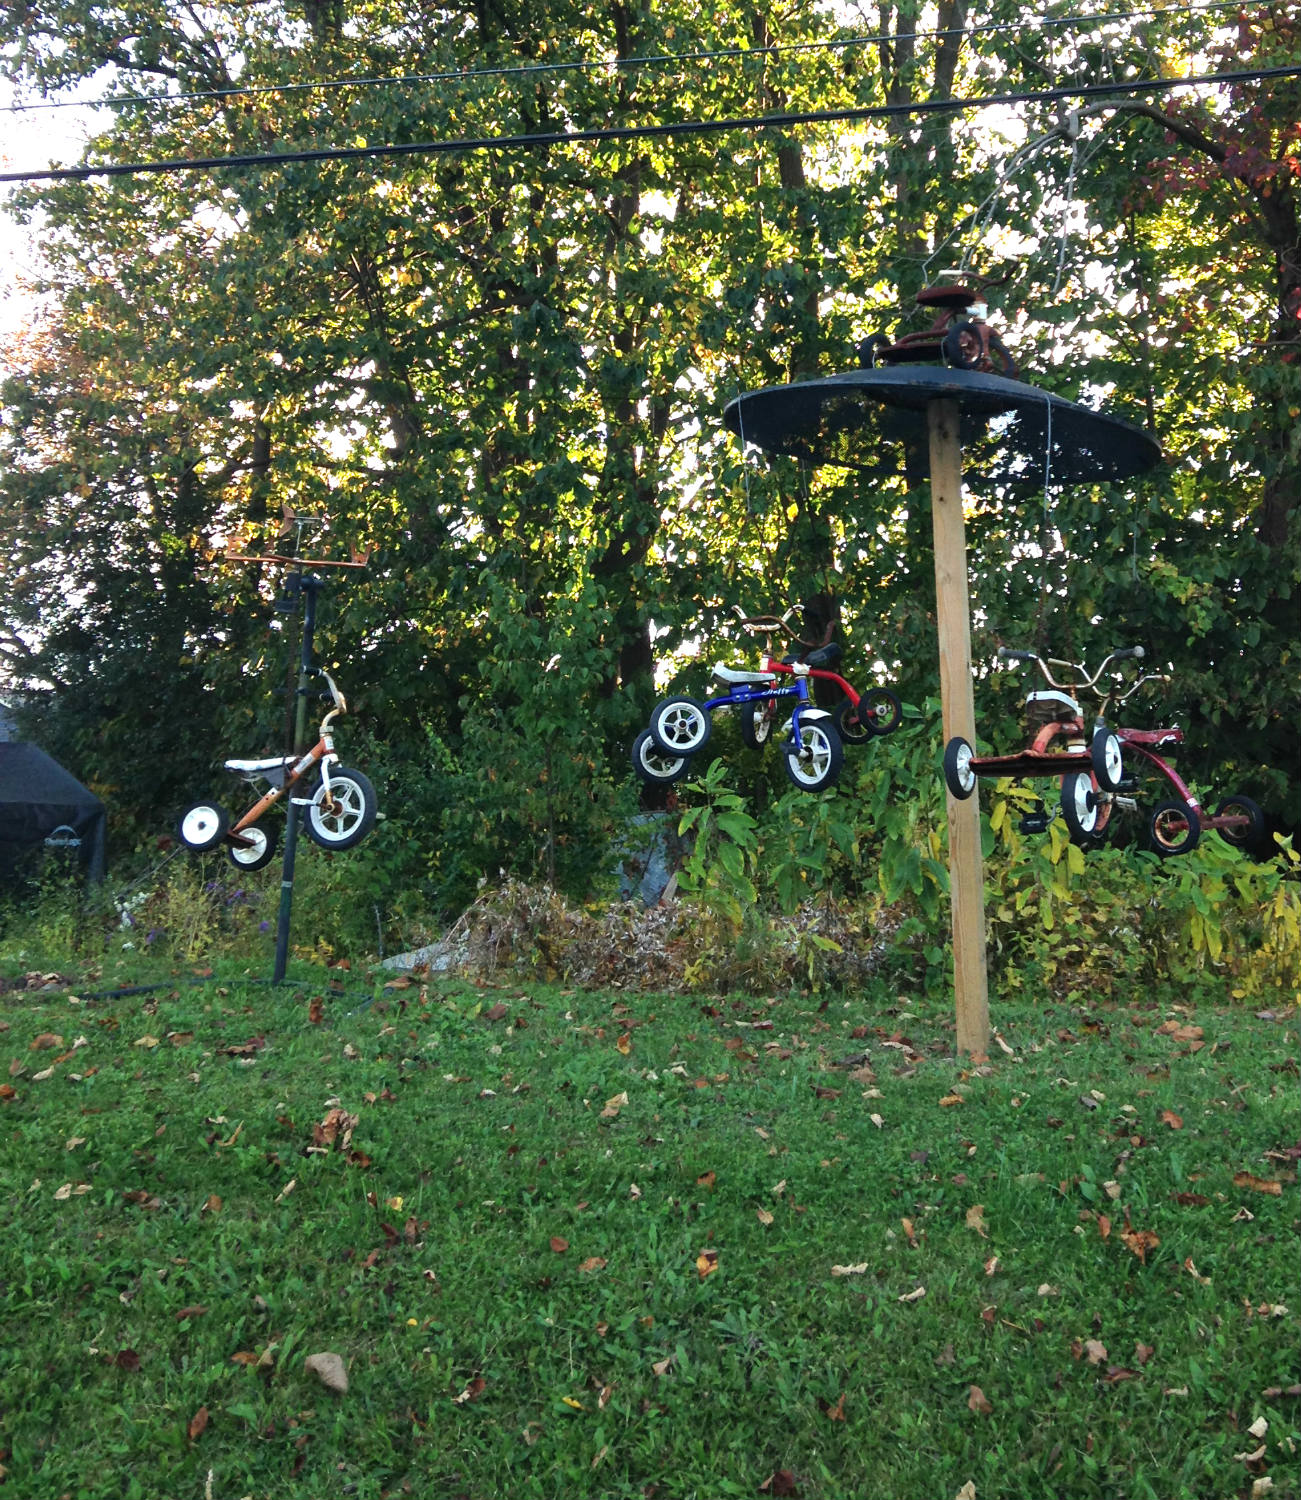 Bicycle Art and Yard Sculptures - Palmyra, NY Tricycle Carousel